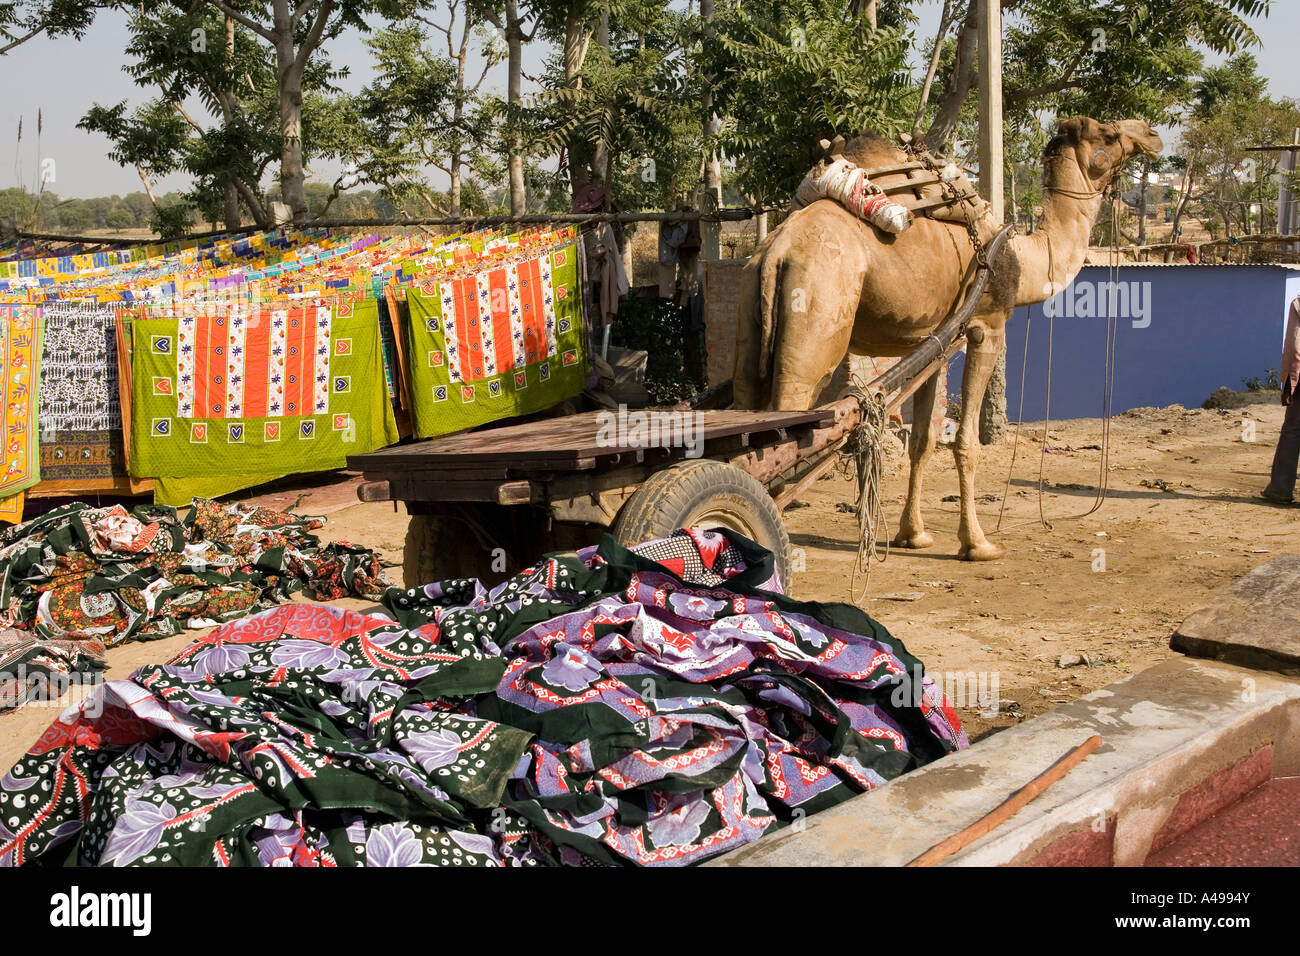 India Rajasthan crafts Sanganer textiles camel cart amongst fabric drying in the sun Stock Photo